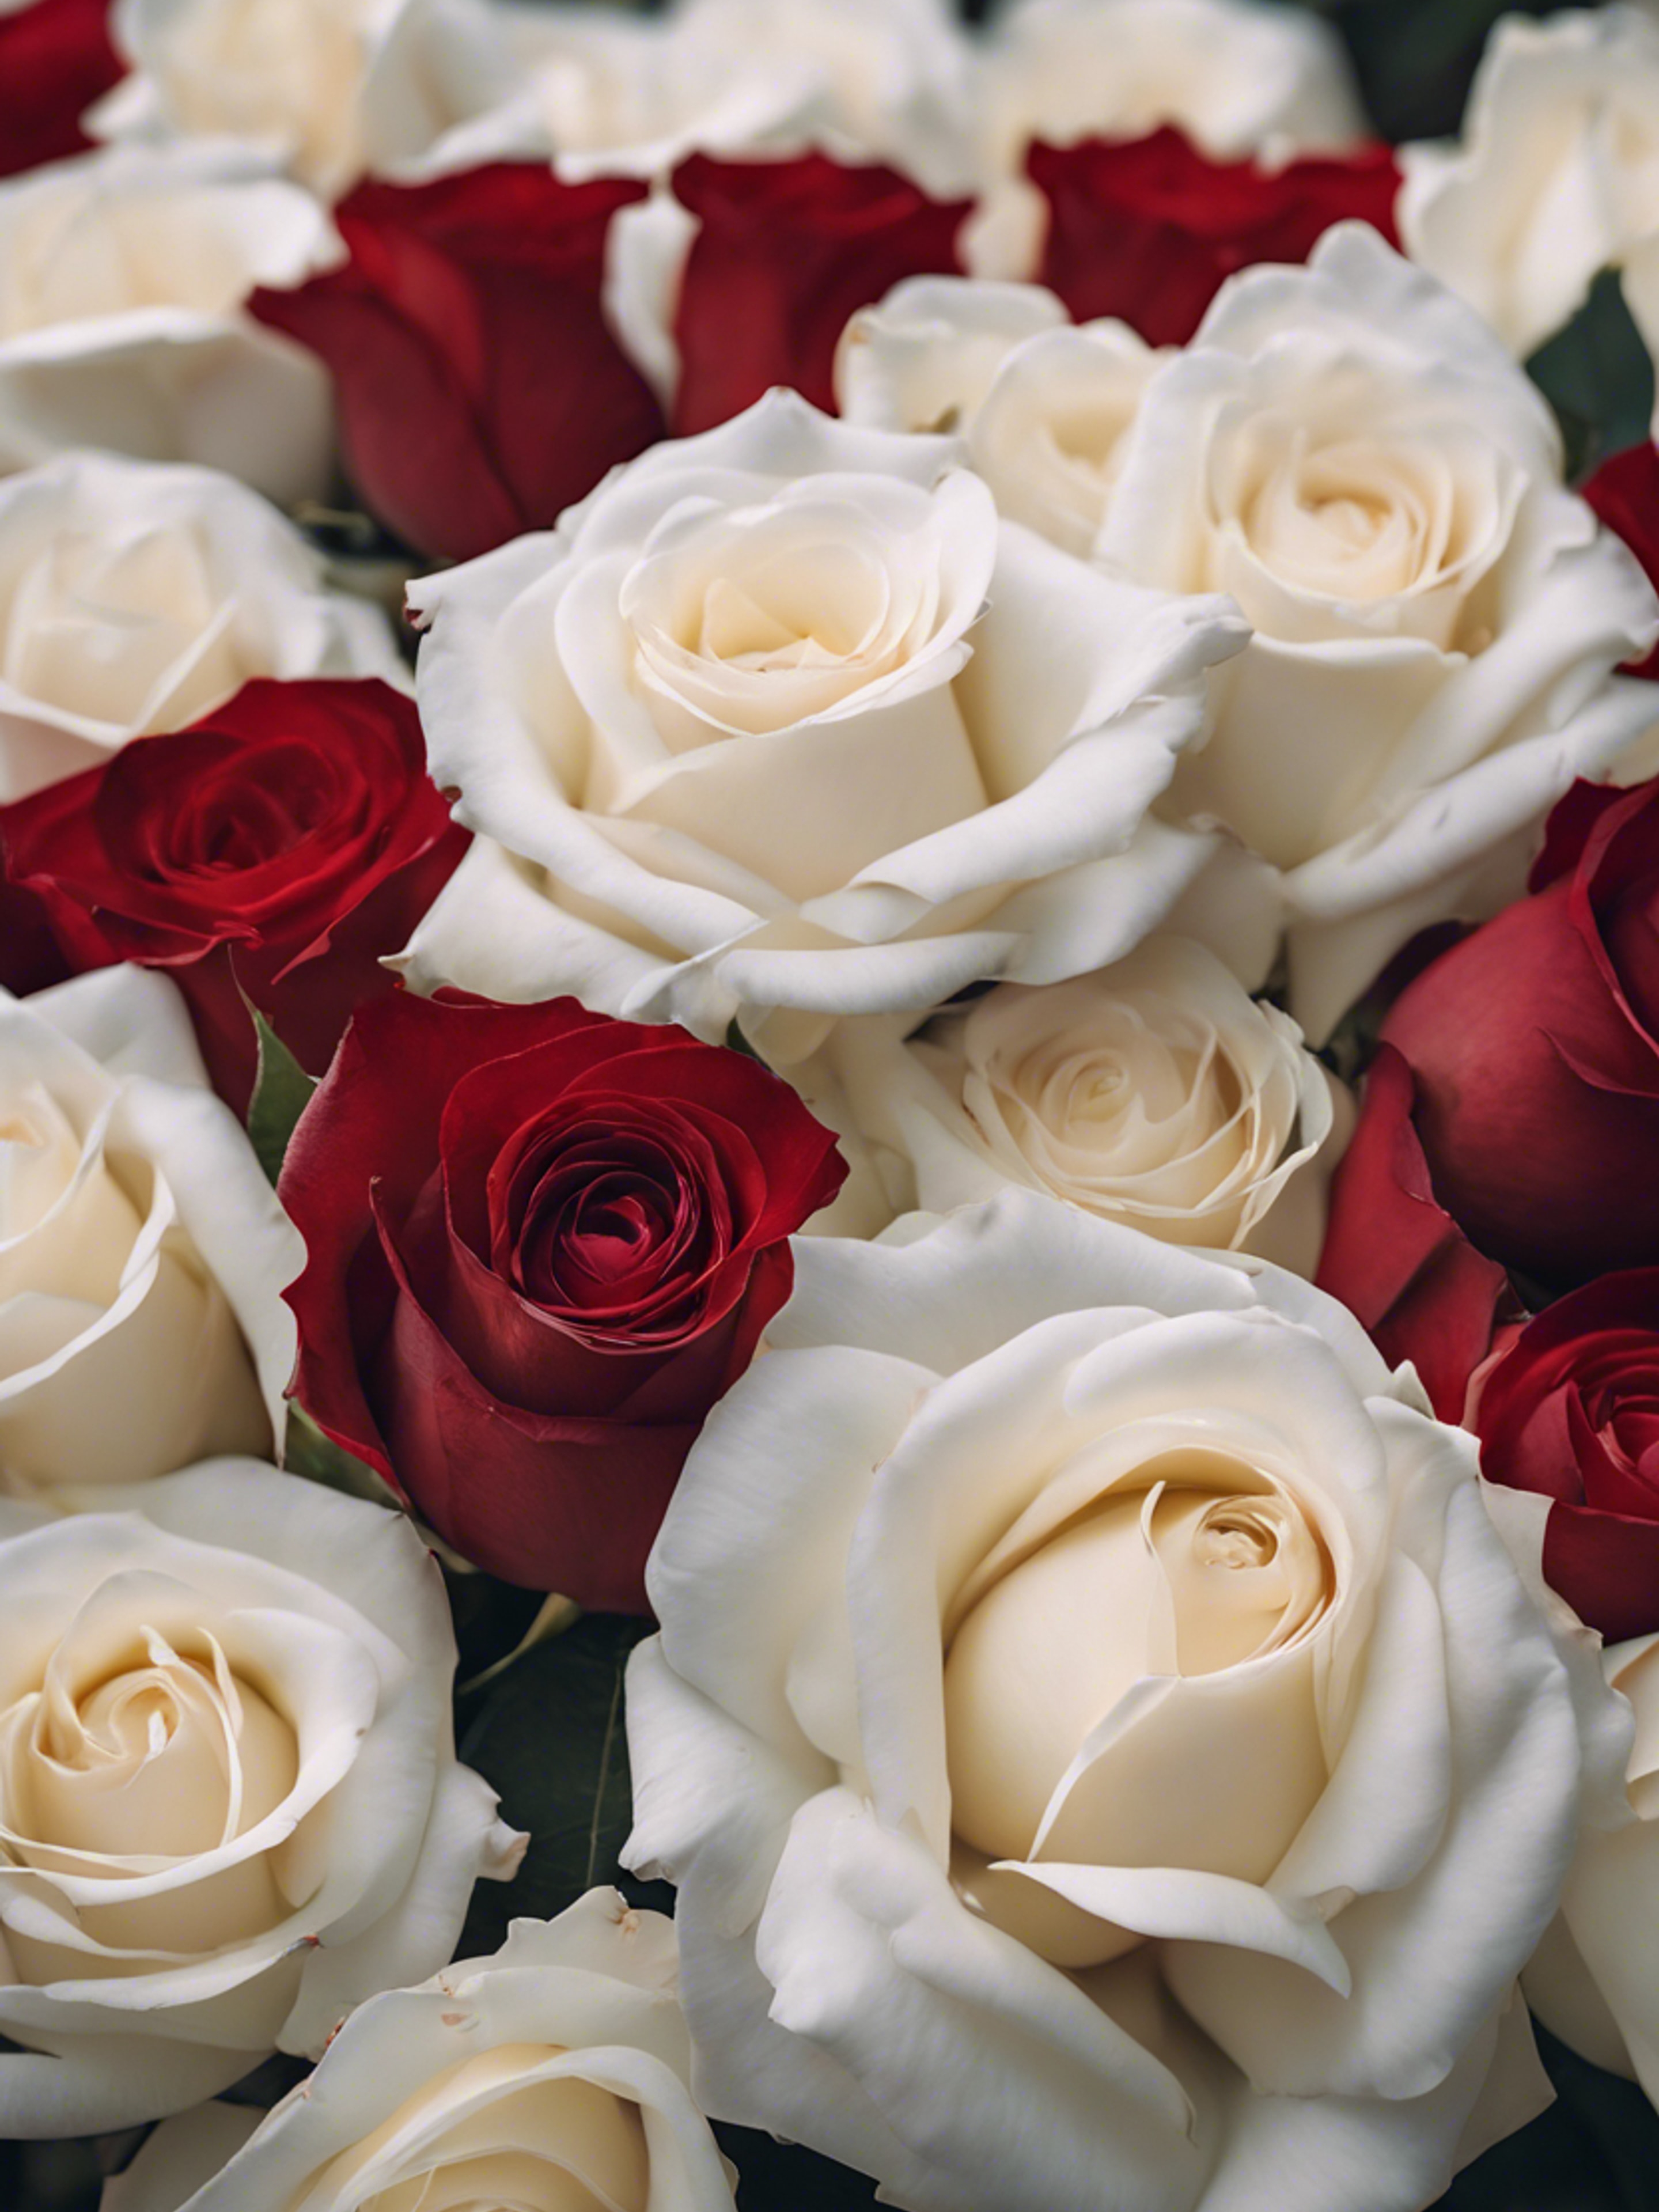 A cluster of white roses with a single red rose nestled in the middle.壁紙[ffa8b13685ab483b9eca]